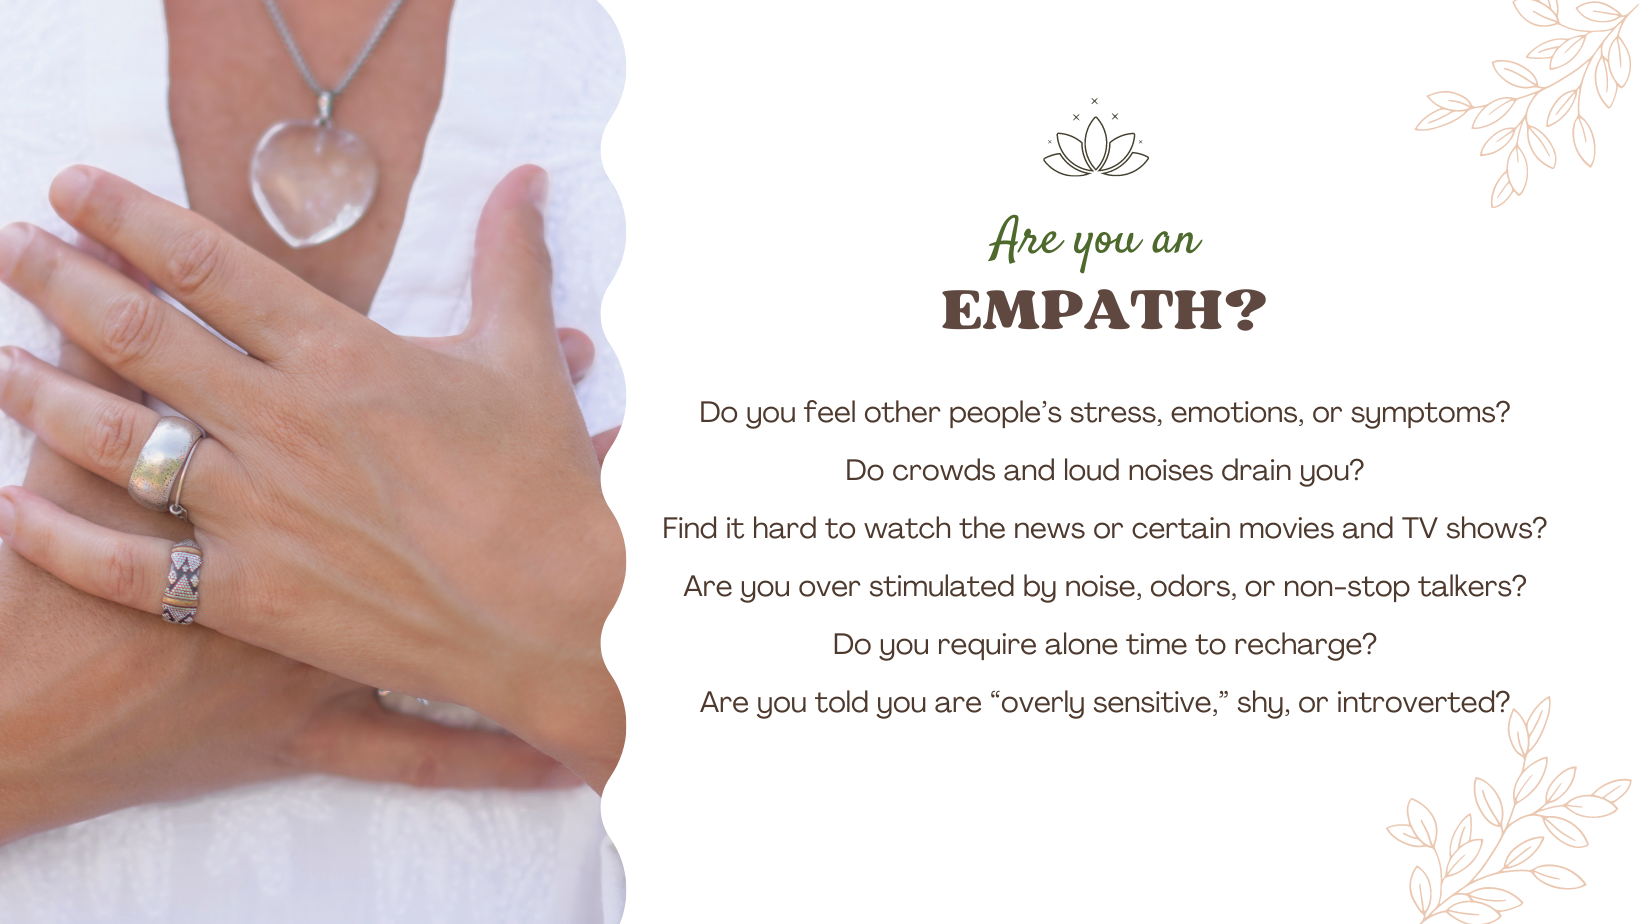 You Are an Empath, Now What?